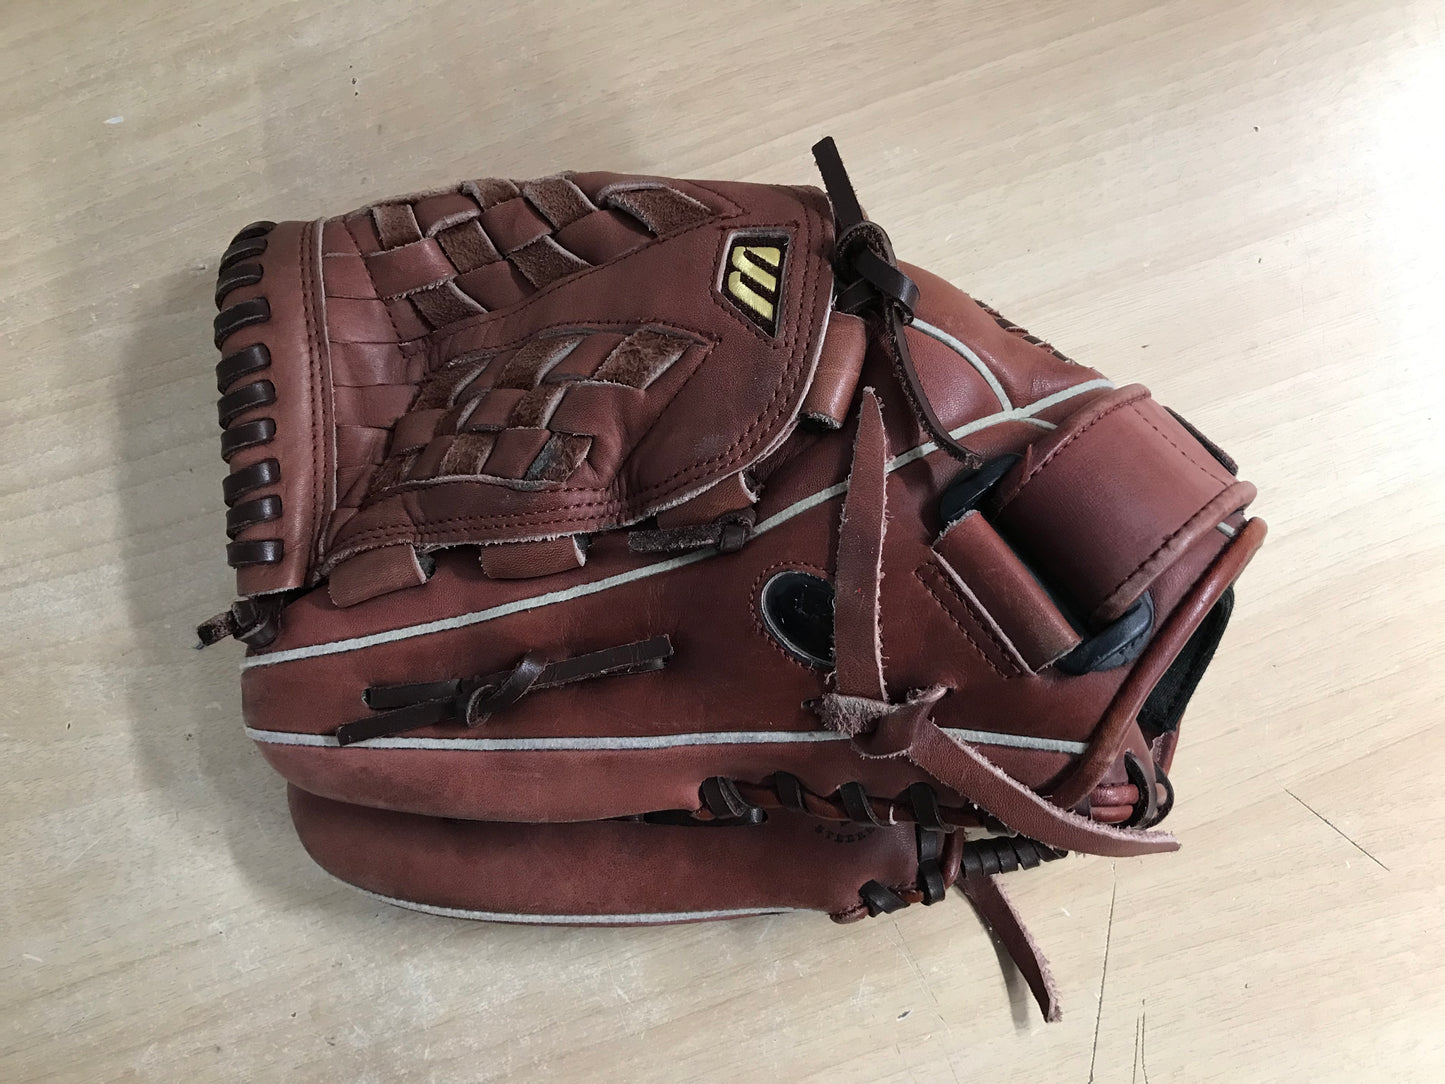 Baseball Glove Adult Size 12 inch Mizuno Brown Leather Fits on RIGHT Hand